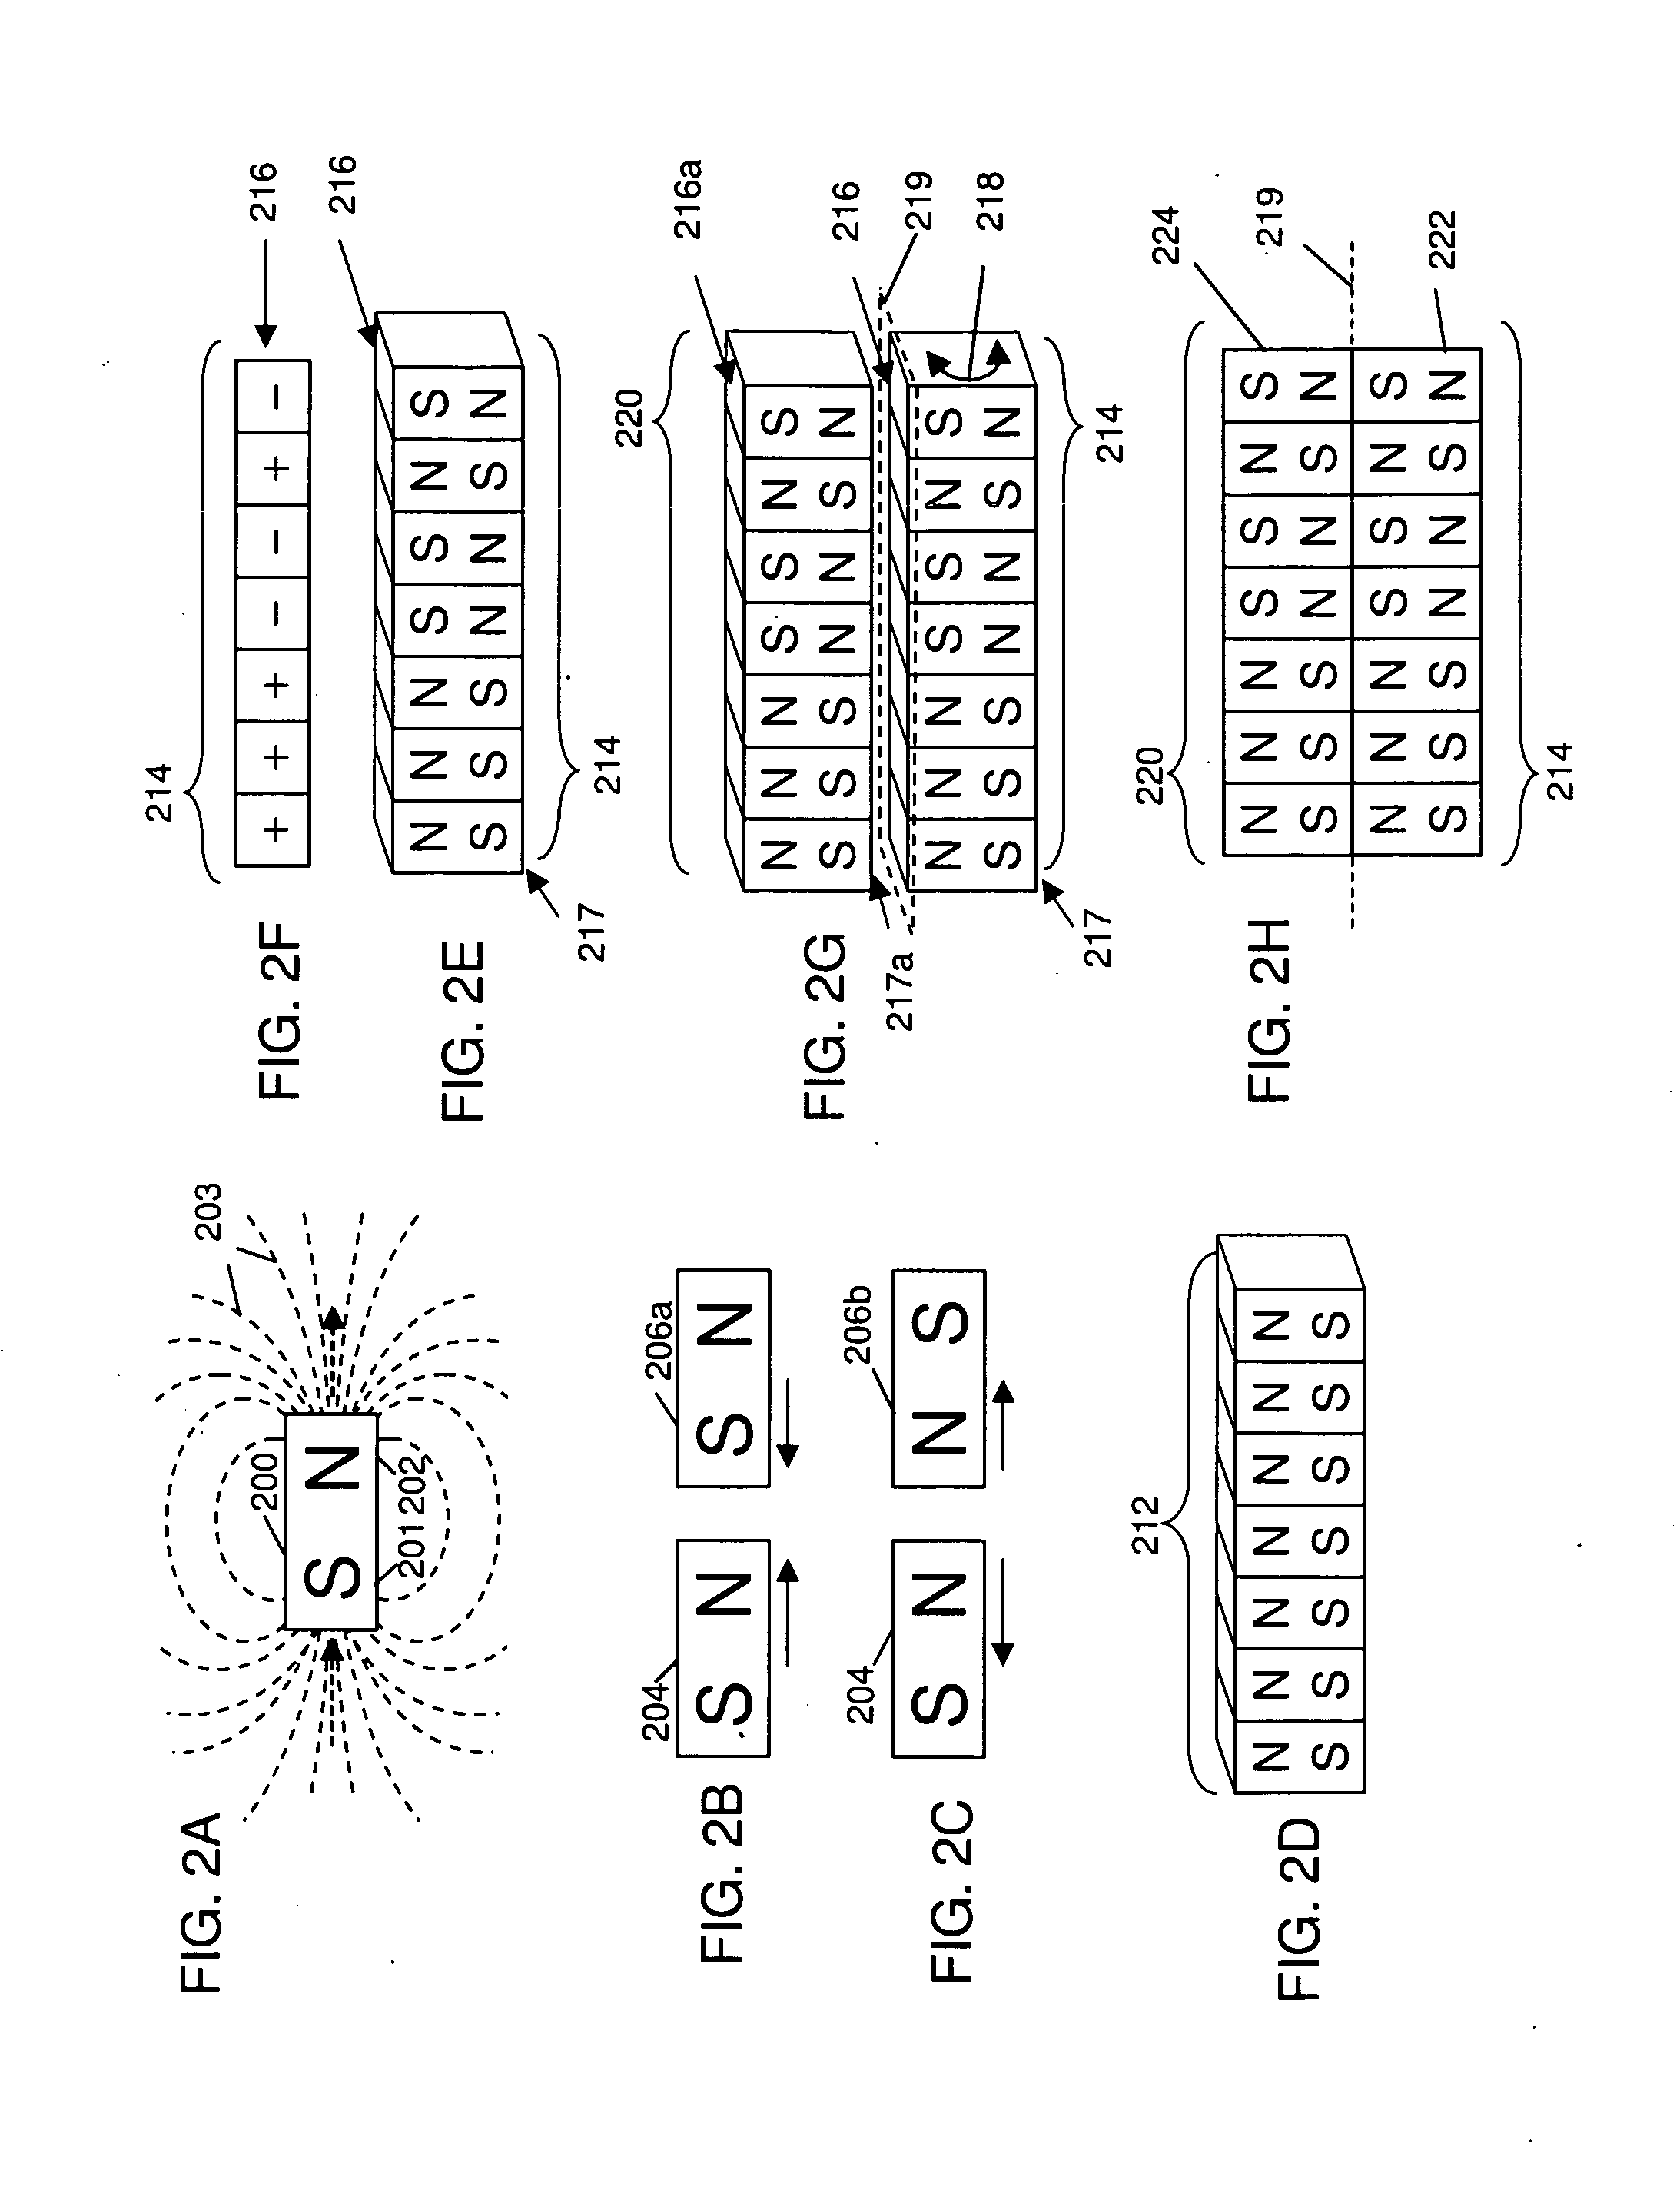 Coded Linear Magnet Arrays in Two Dimensions